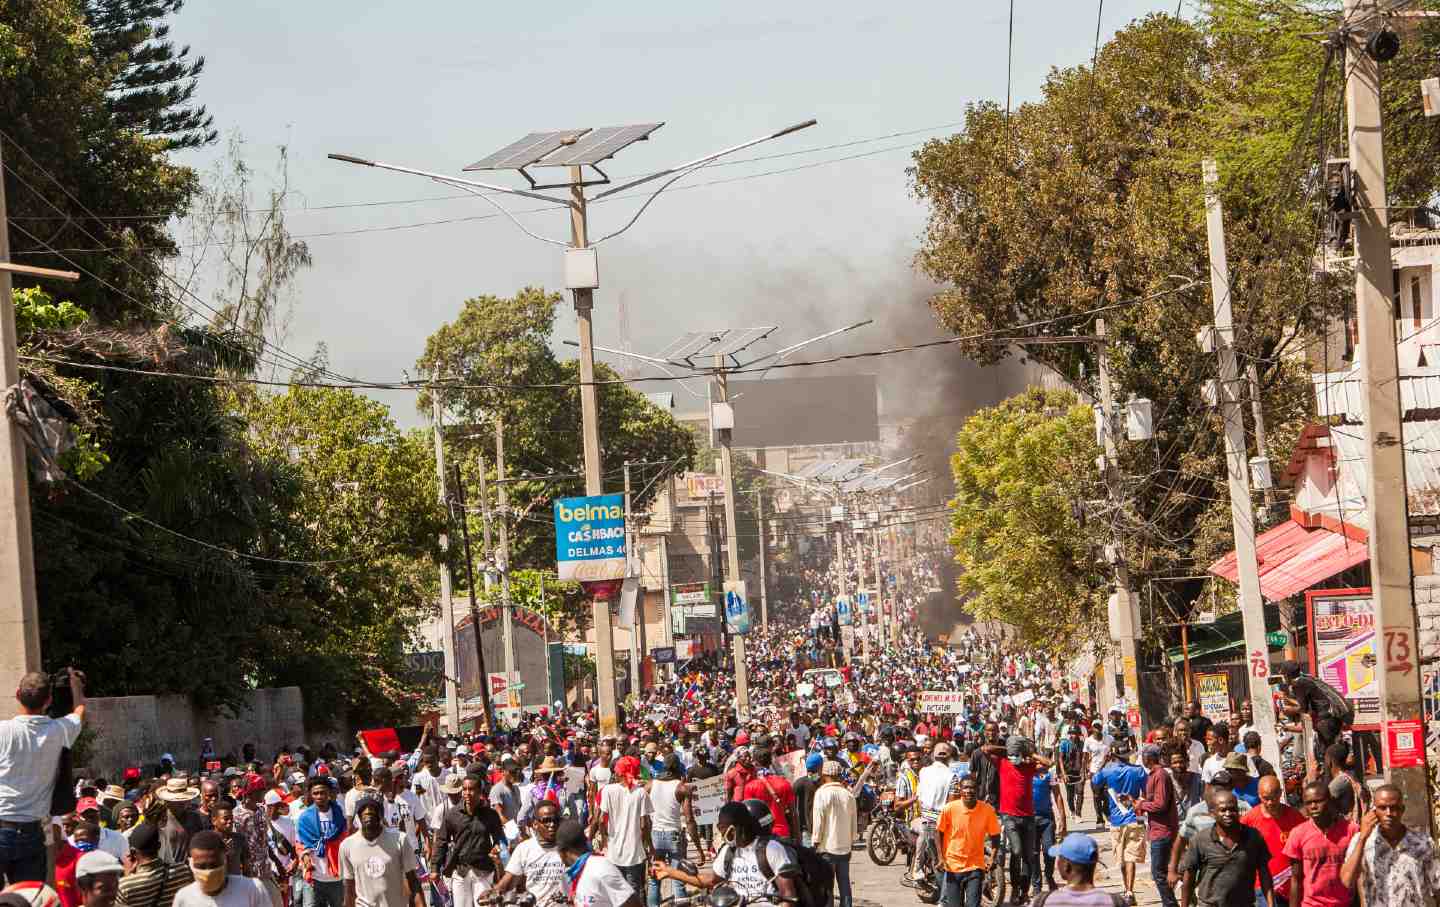 After a Decade of Misrule, the People of Haiti Have Had Enough